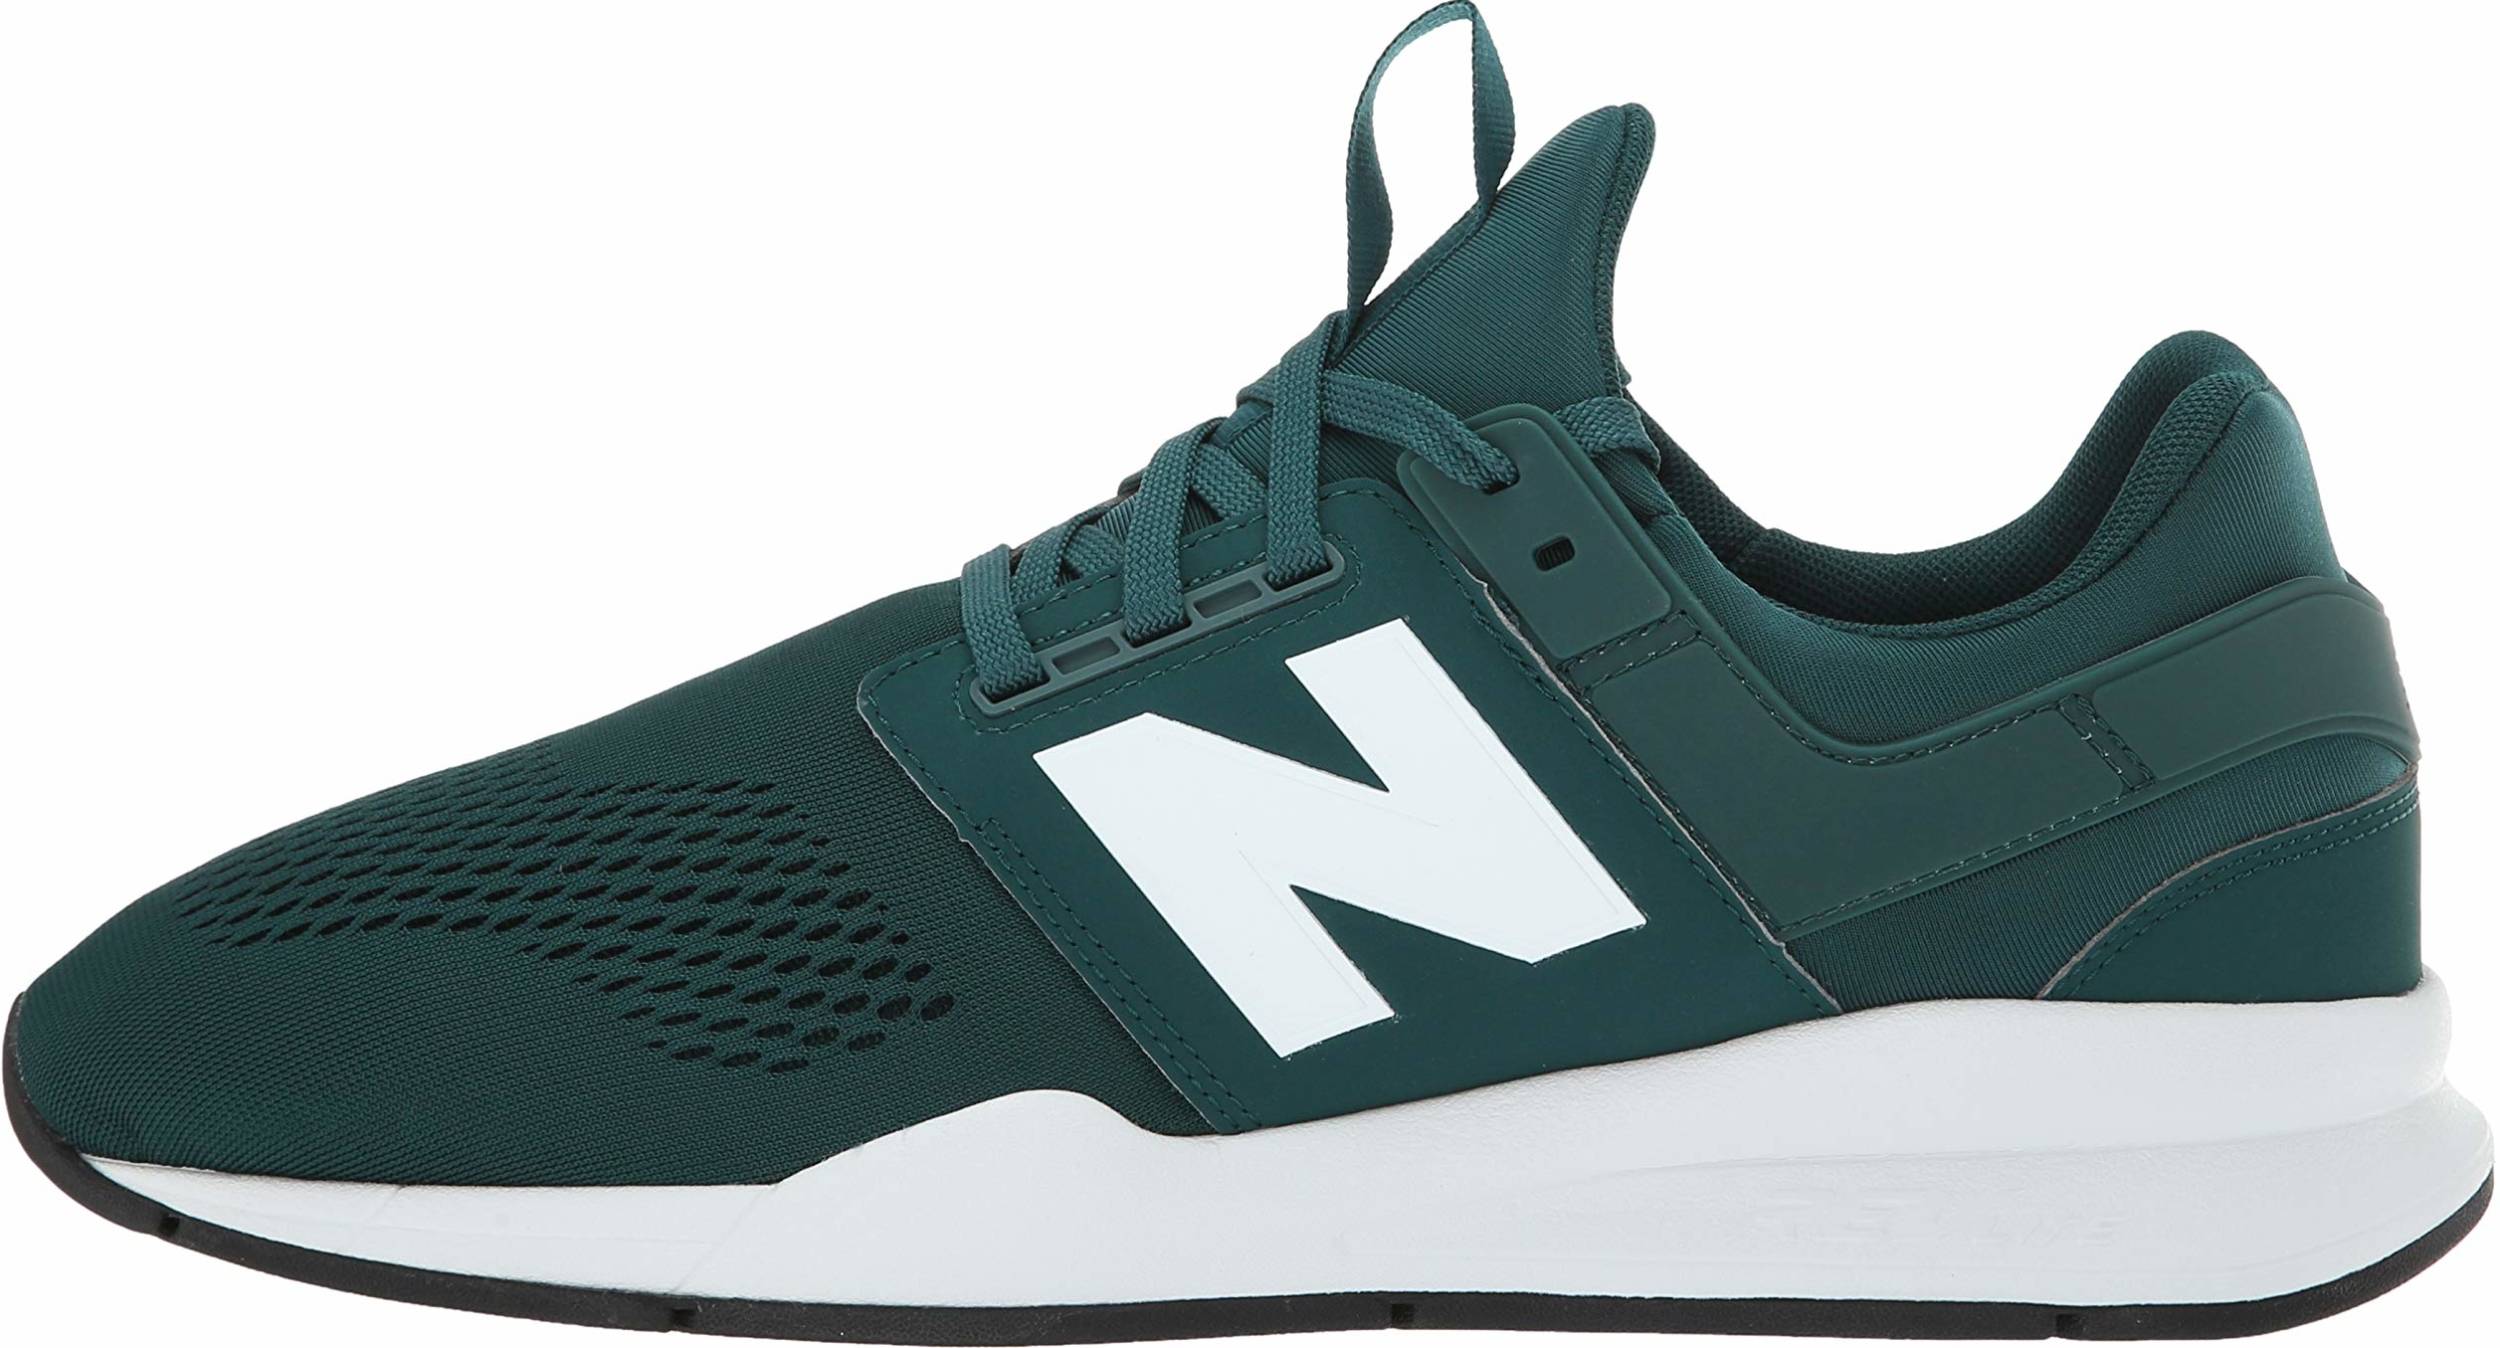 Only £44 + Review of New Balance 247 v2 